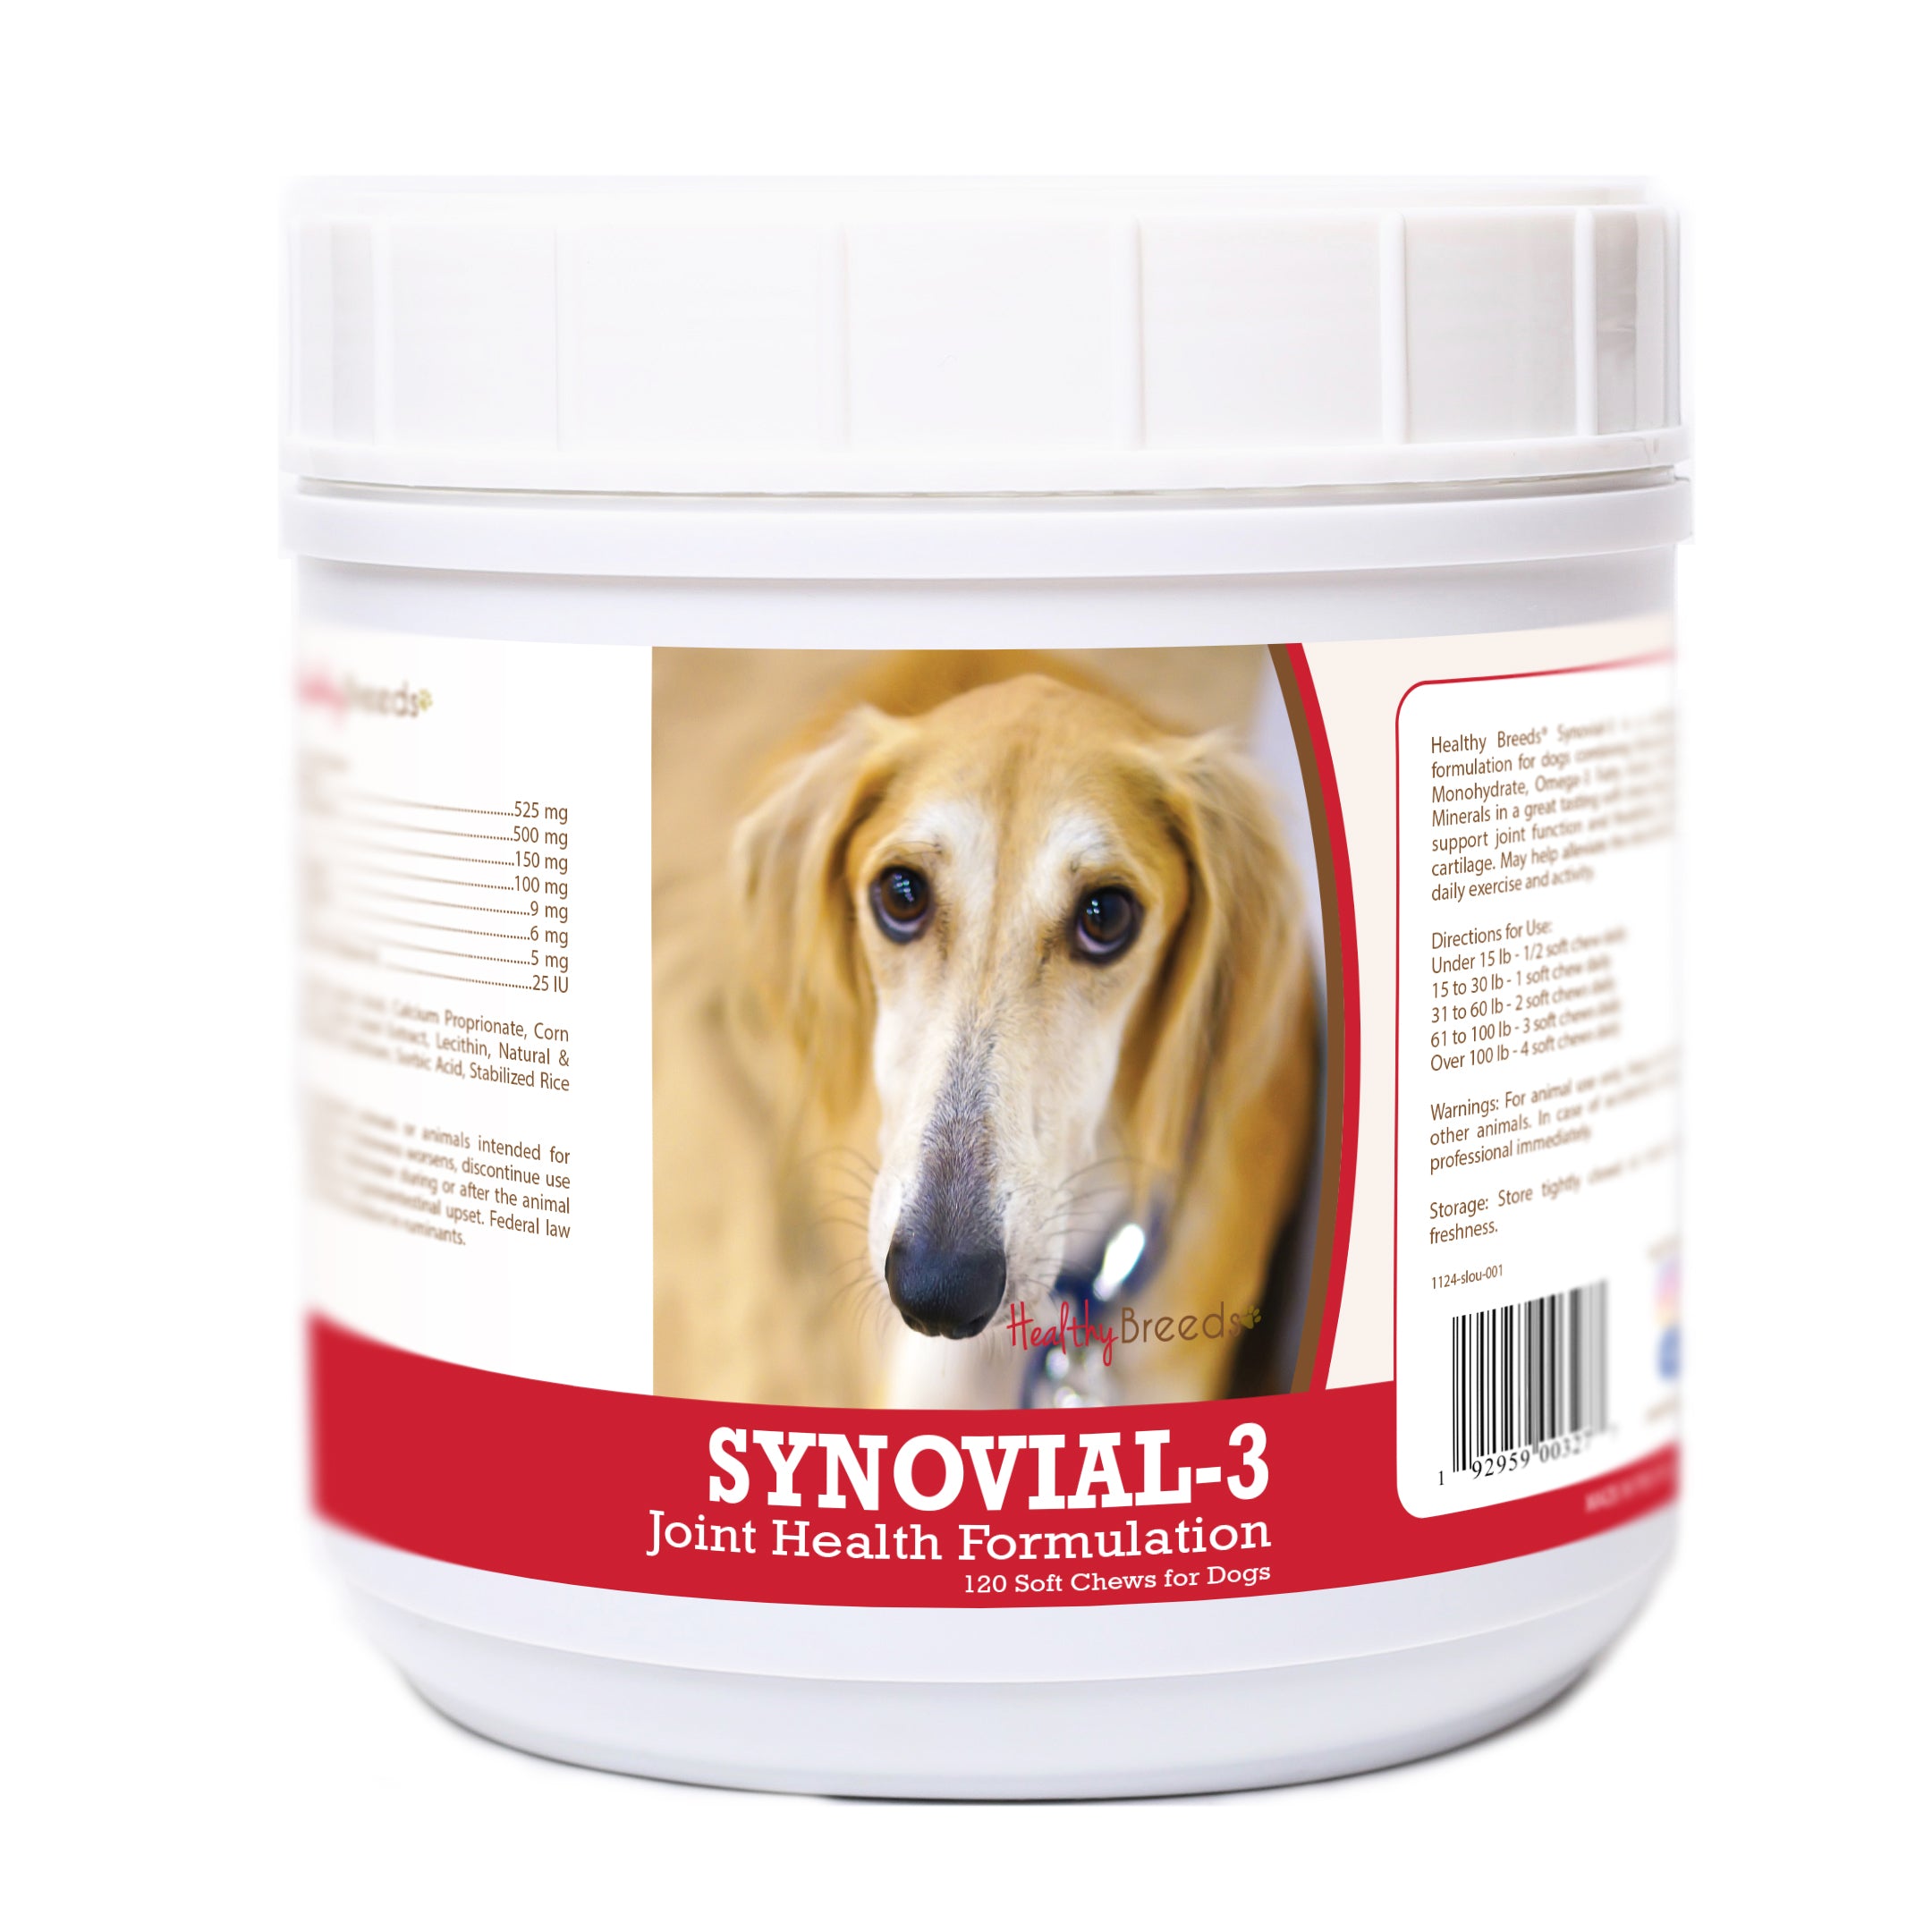 Sloughi Synovial-3 Joint Health Formulation Soft Chews 120 Count